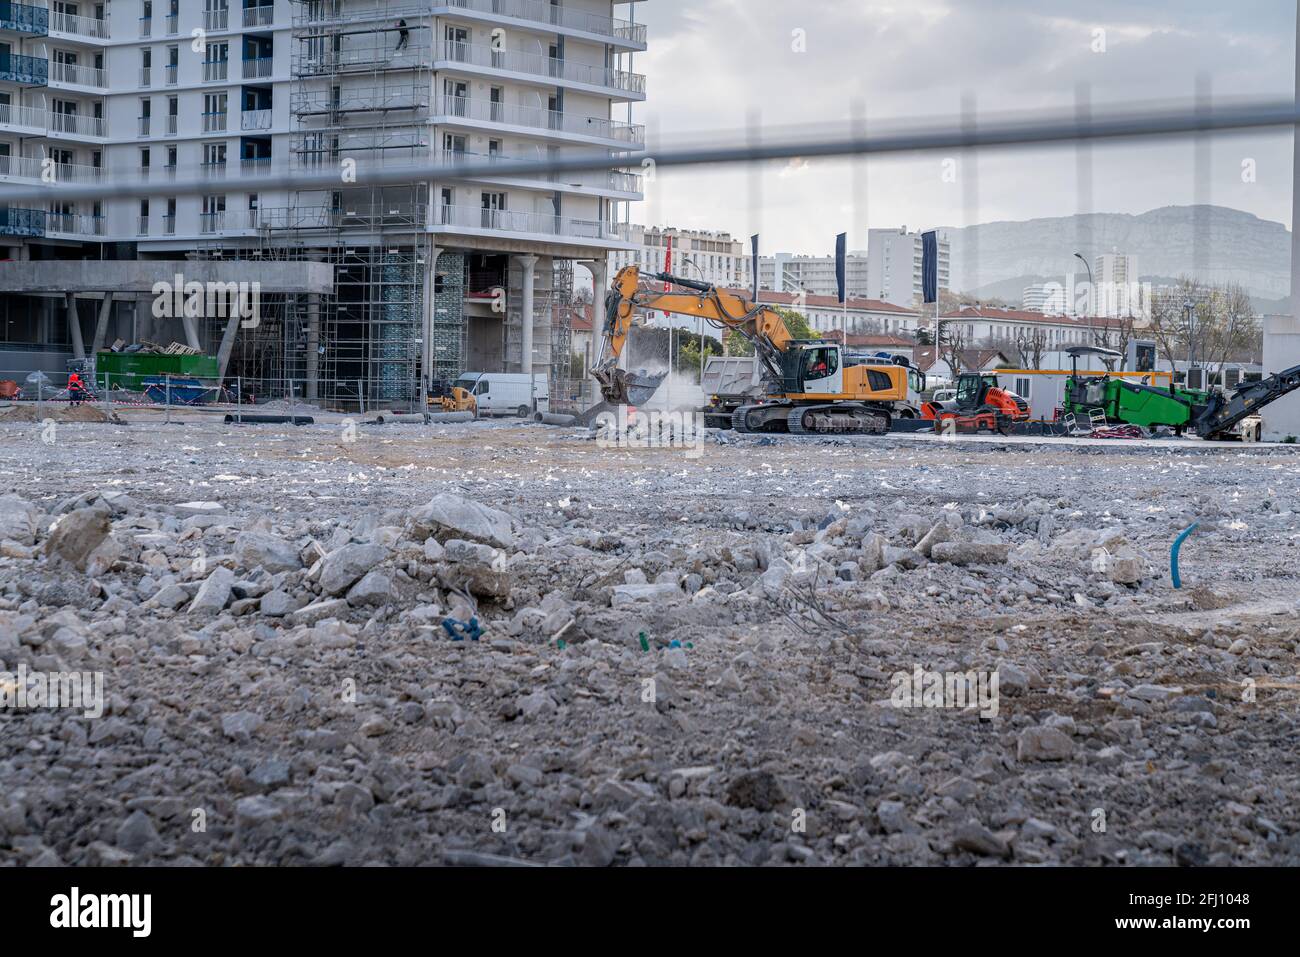 Construction site in the city - Real Estate project Stock Photo